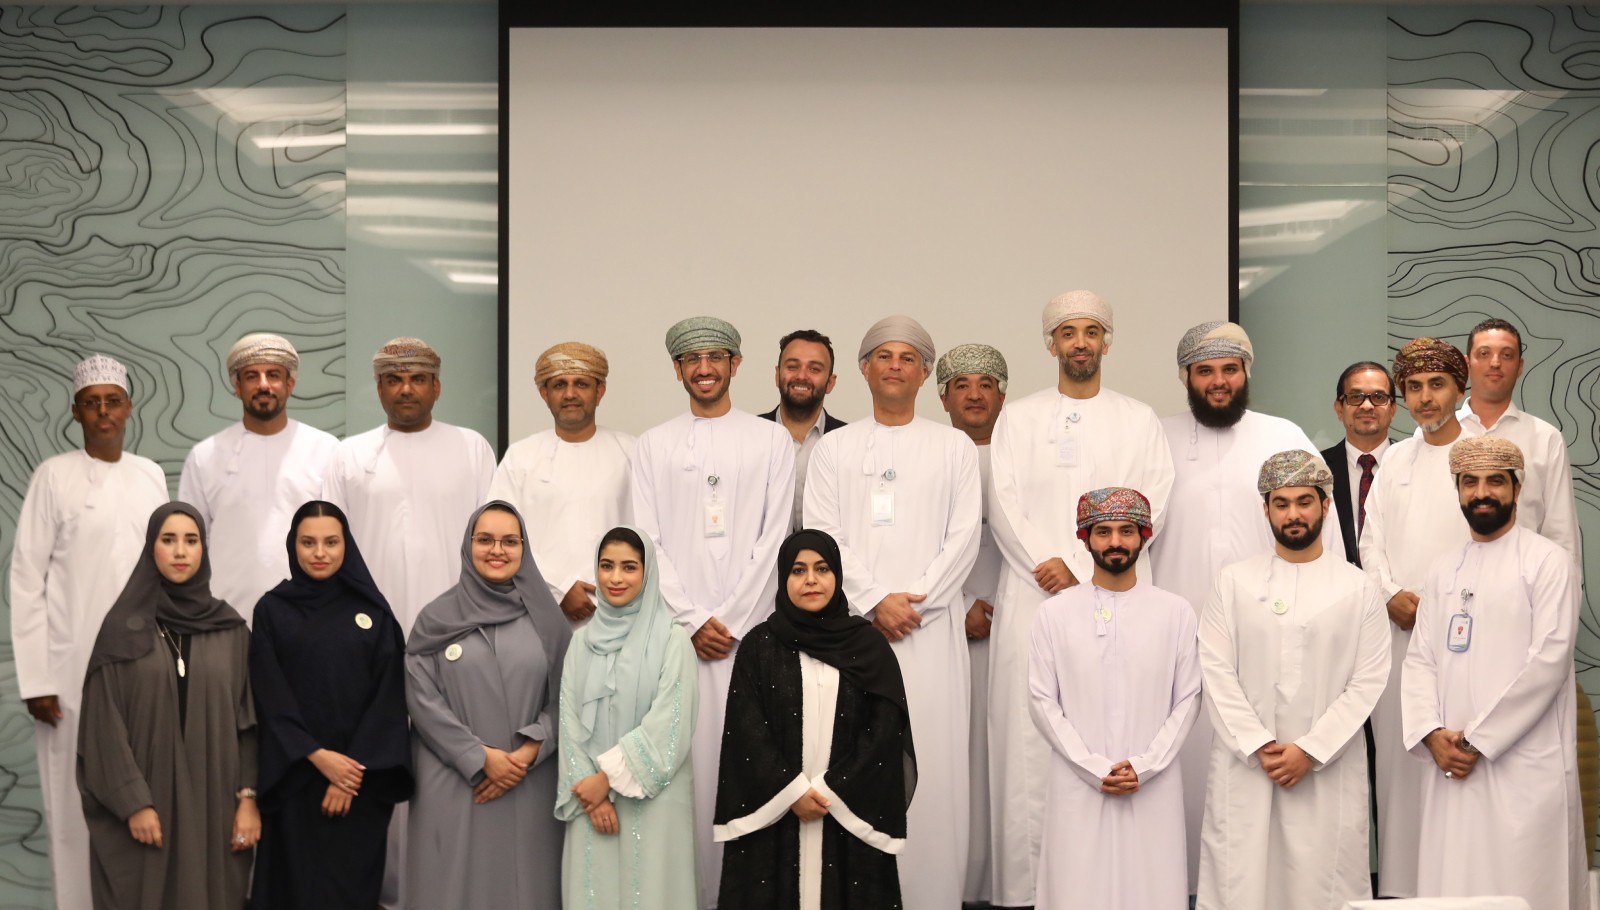 YOUNG OMANIS SUCCESSFULLY COMPLETE GRADUATE TRAINING PROGRAMME RUN BY OMAN OIL MARKETING COMPANY